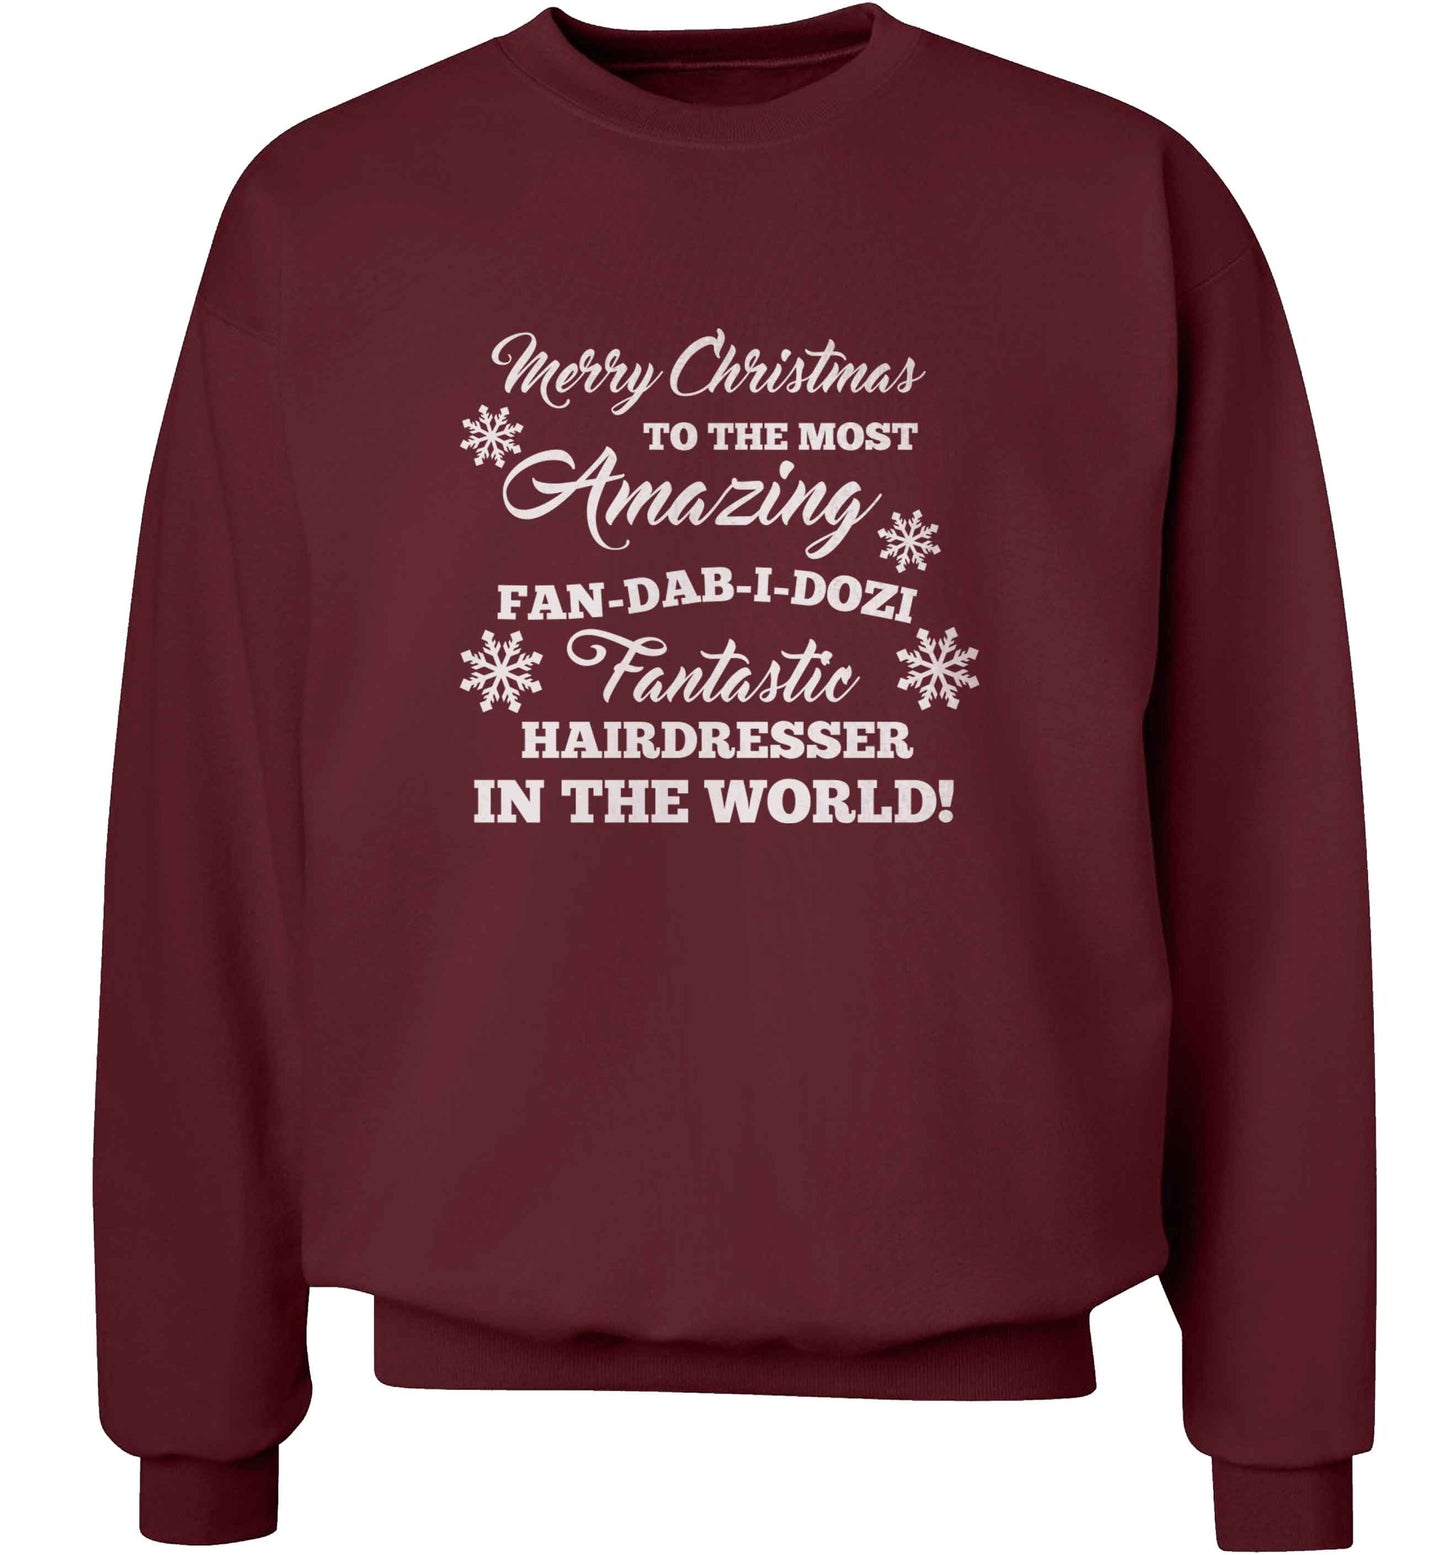 Merry Christmas to the most amazing dental assistant in the world! adult's unisex maroon sweater 2XL